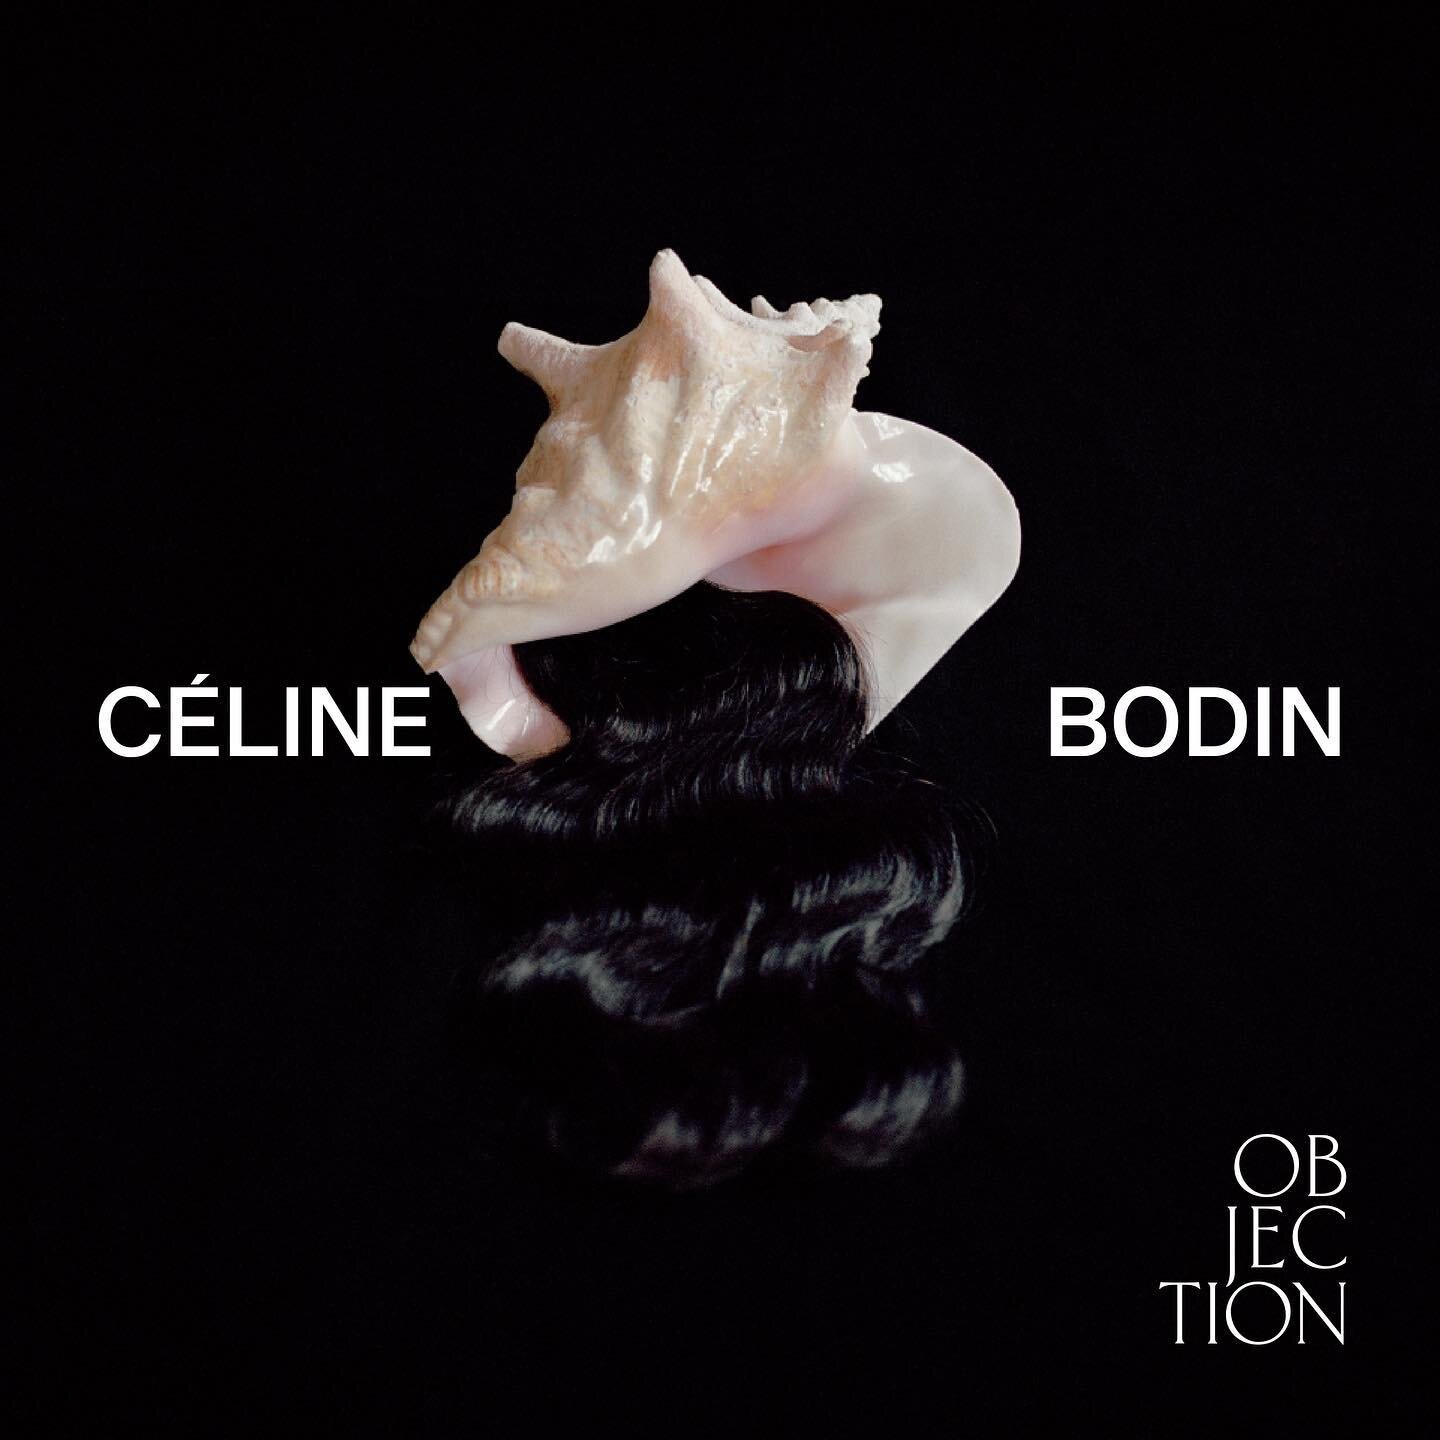 &ldquo;Venus Variations&rdquo; C&eacute;line Bodin reinvests the bodies of the iconic Greek Venuses and wonders about the journey of these standards of beauty from the Antique works til nowadays. 

@celine_bodin 

A story to discover in Objection&rsq